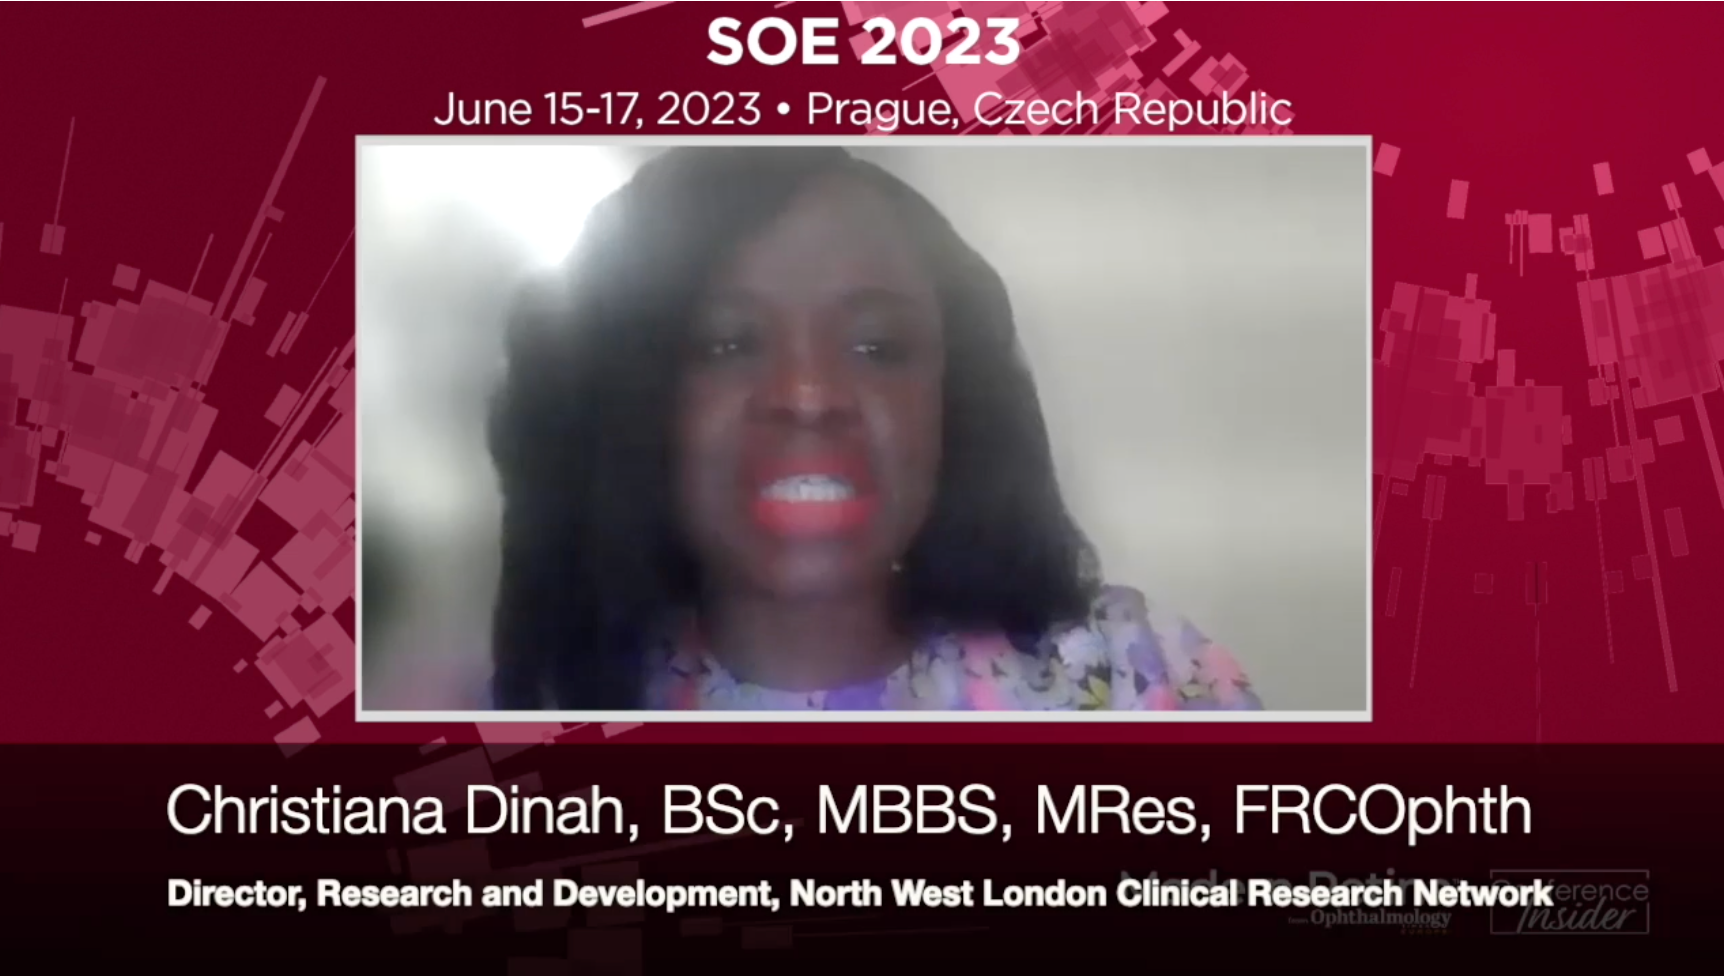 Dr Christiana Dinah discusses her SOE presentation, "Geographic Atrophy: A Mixed Method Study." She is appearing via video chat.